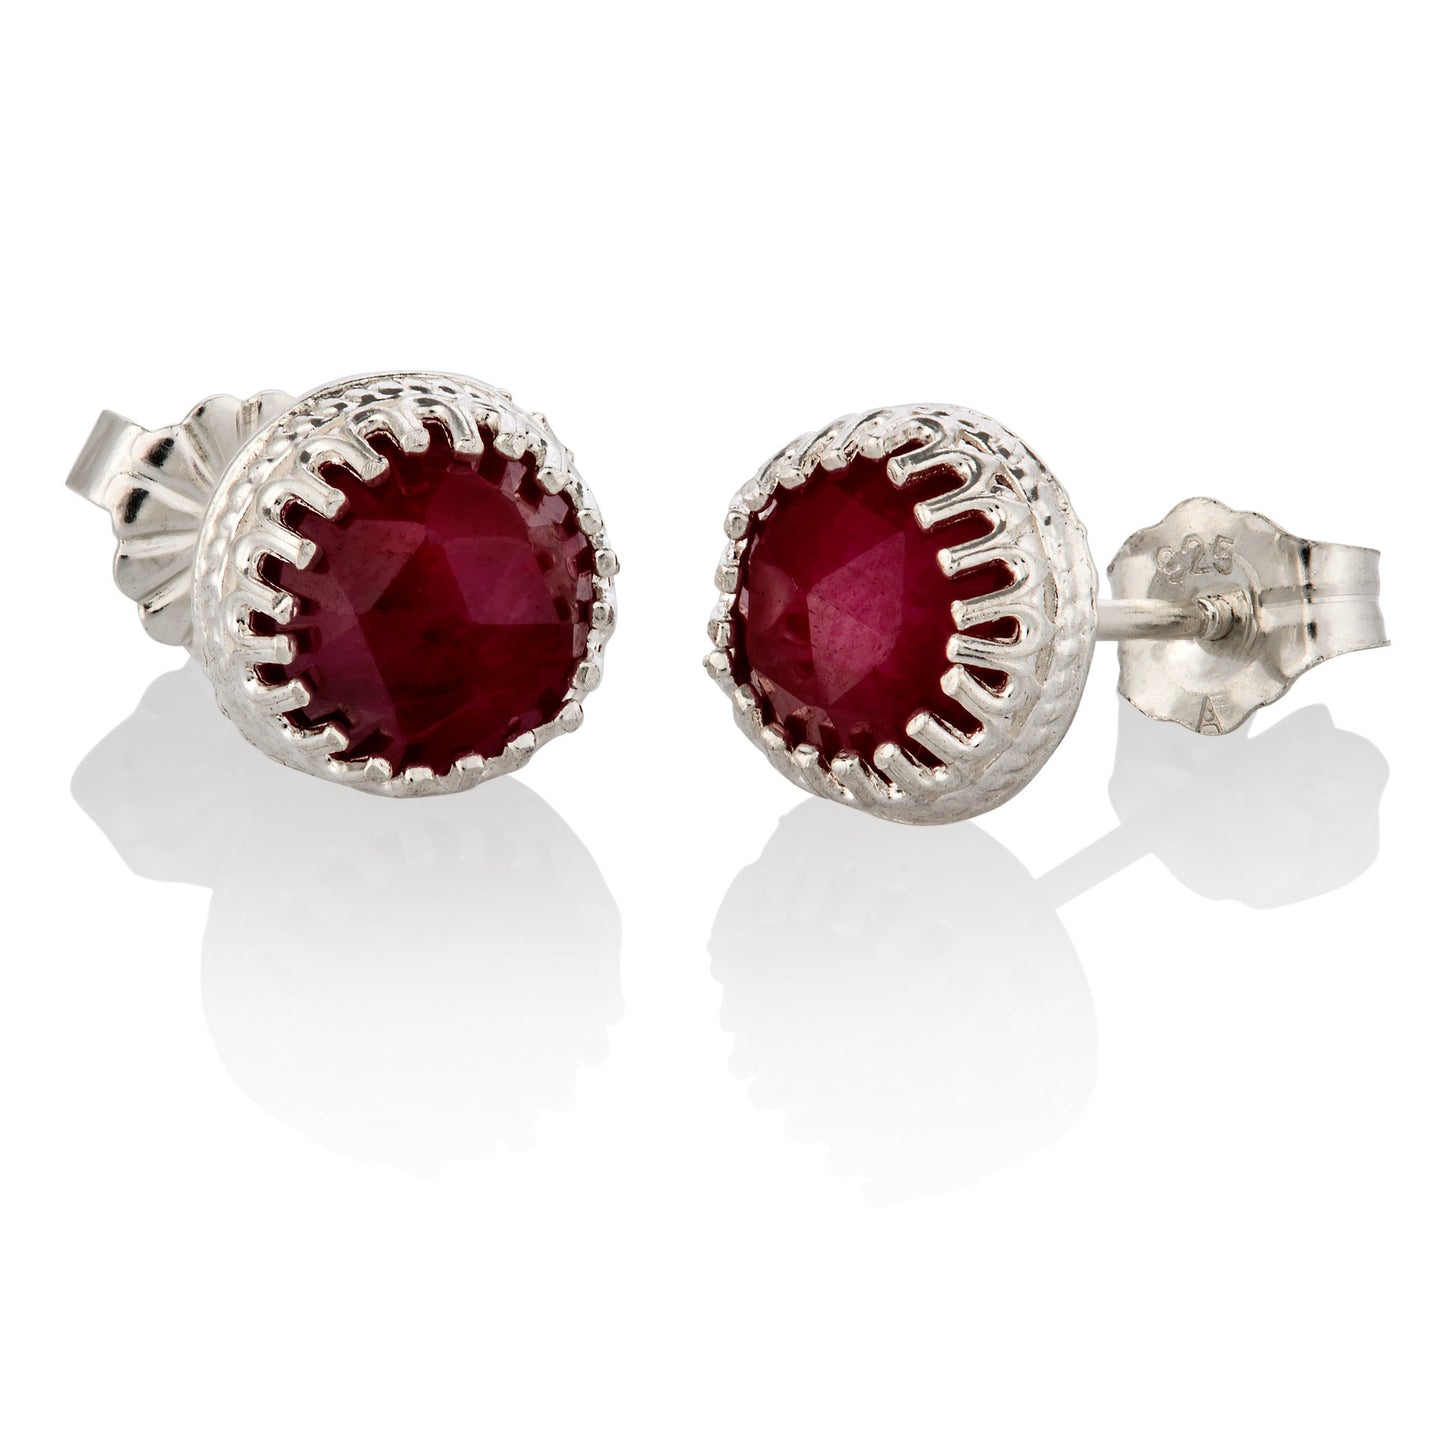 Sterling Silver Ruby Stud Earrings July birthstone Natural 6mm Red stone studs for women jewelry